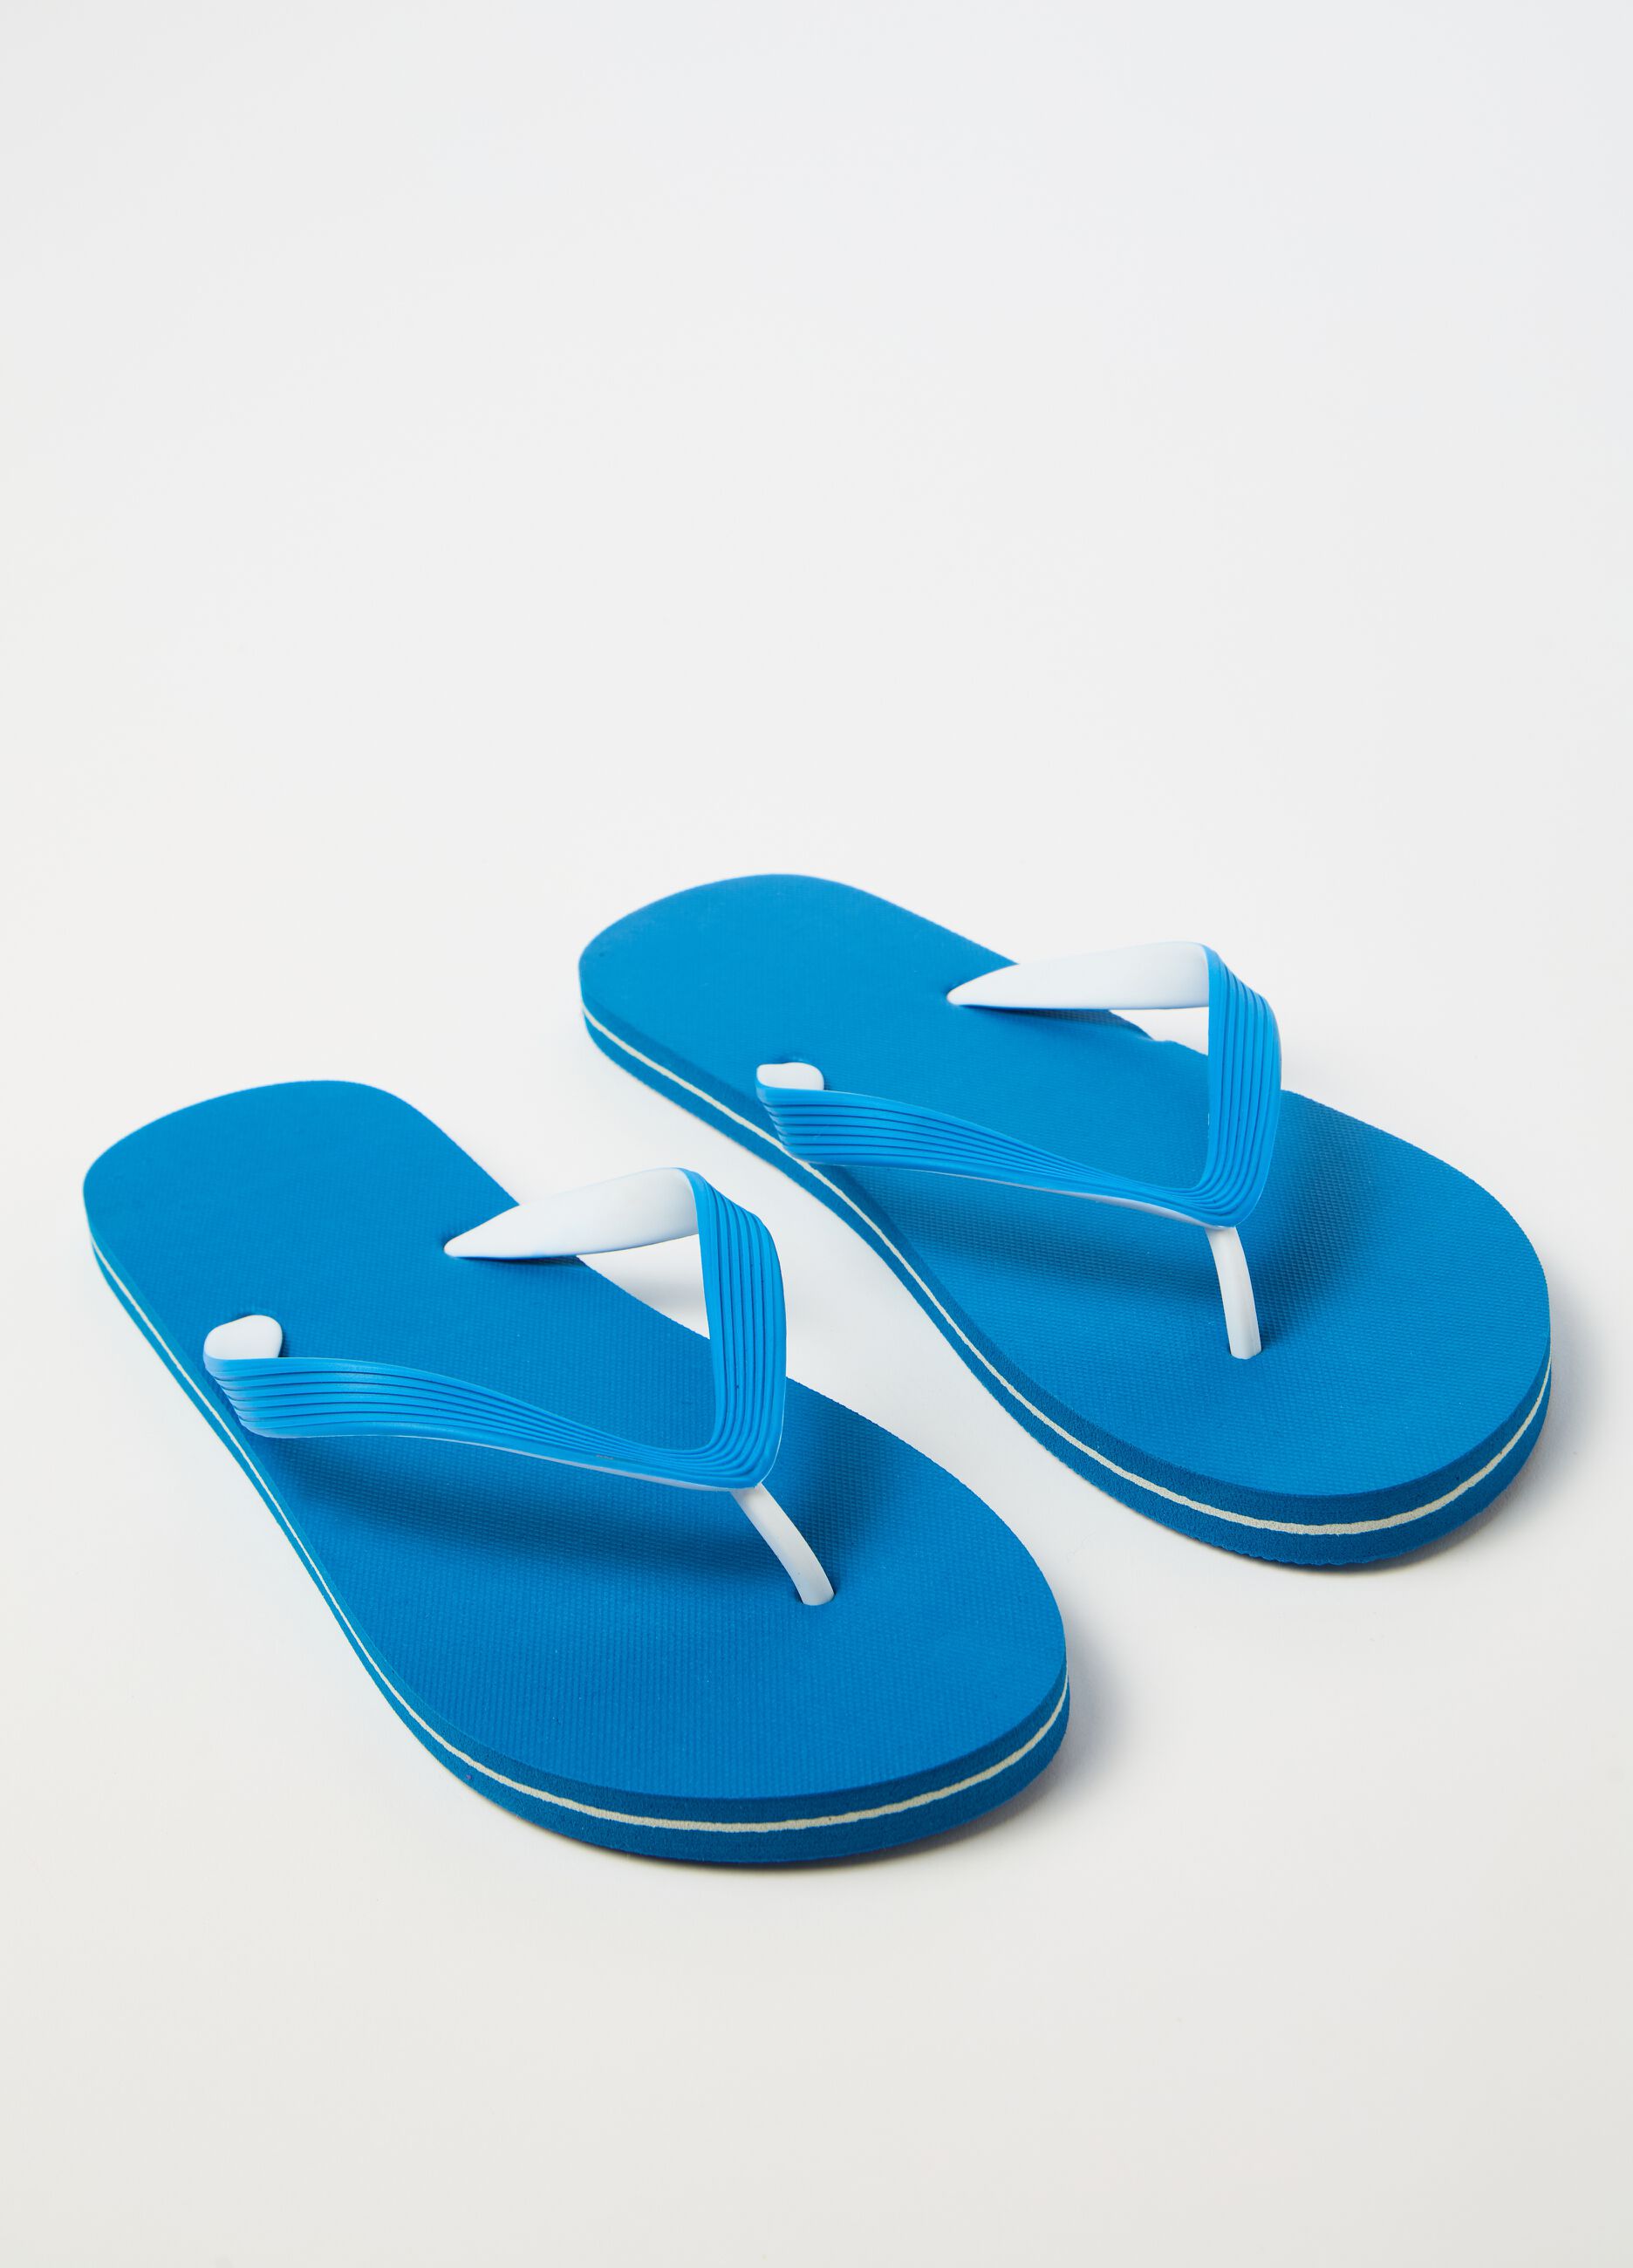 Thong sandals with striped straps